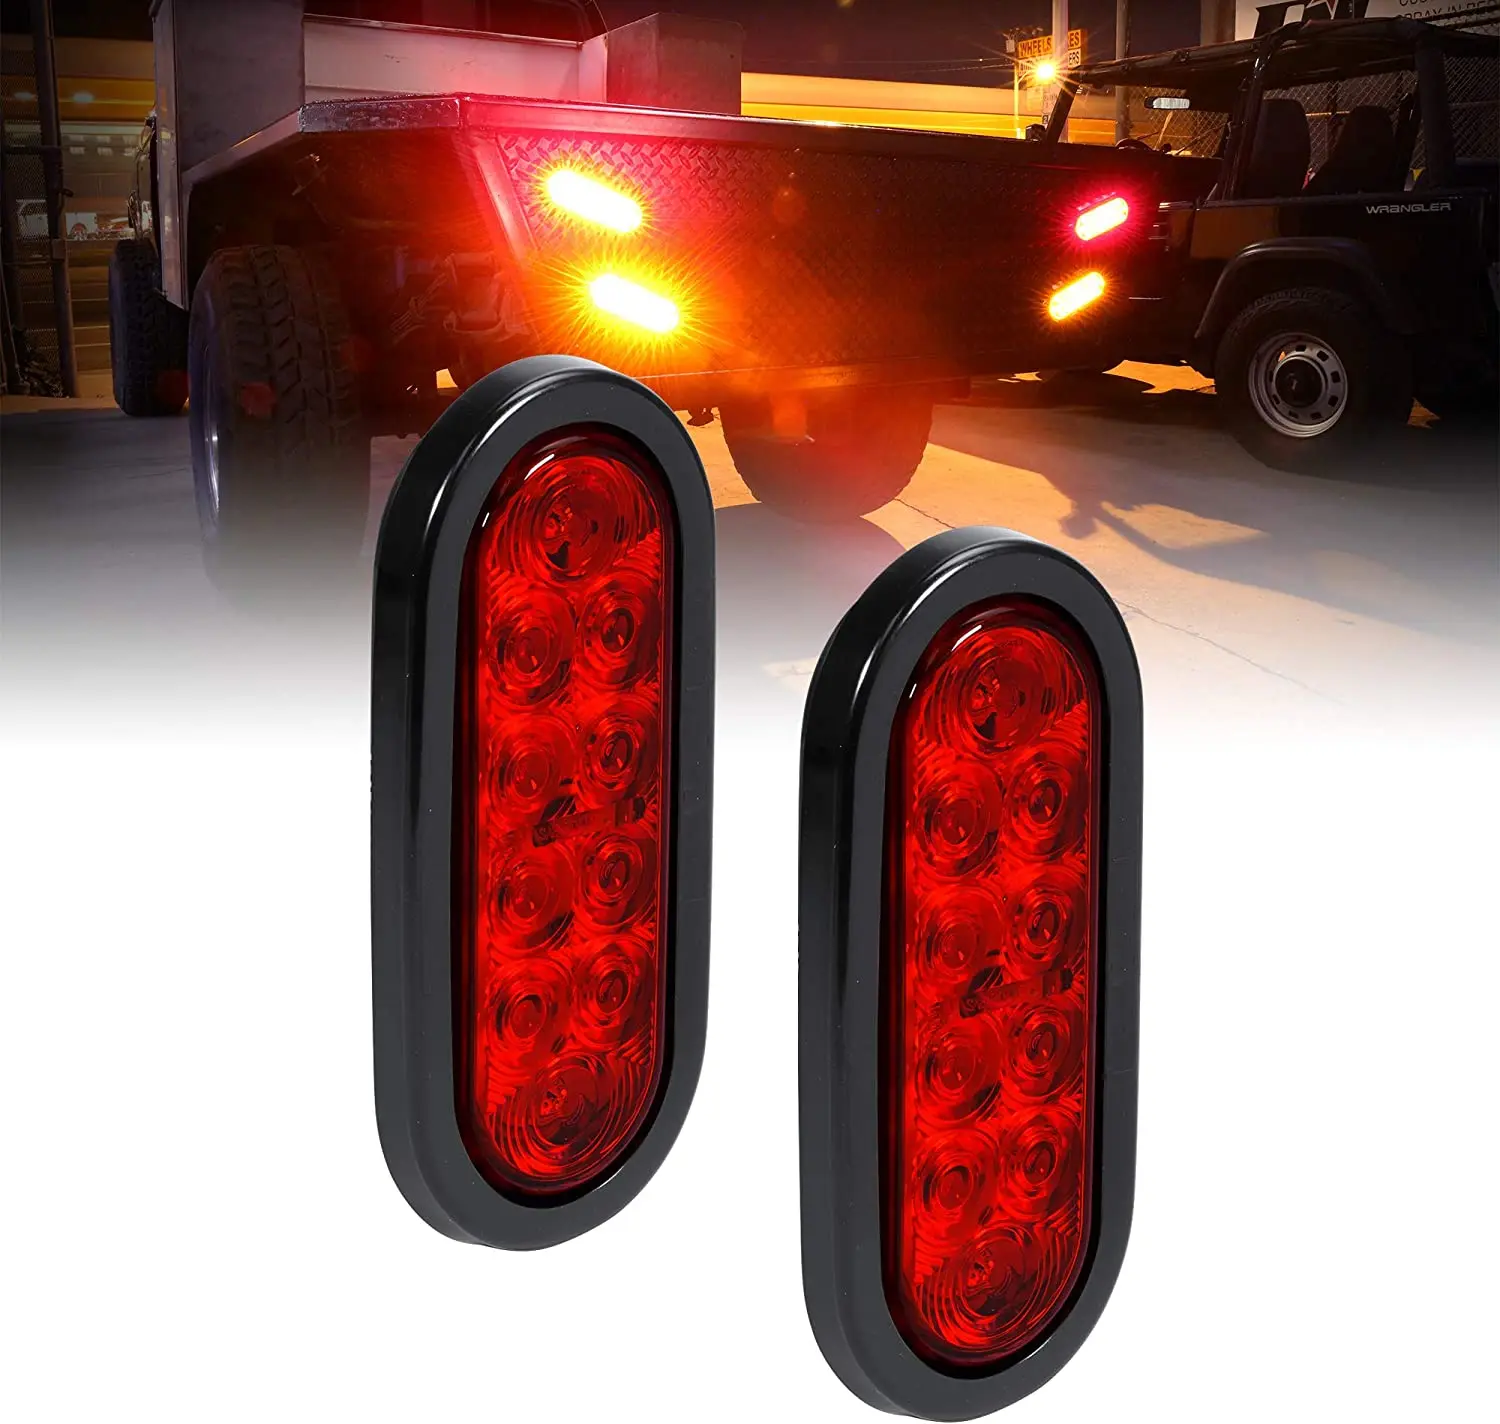 12V 10 LED Red/White/Amber Tail Light with connector for Truck Trailer Lorry Boat